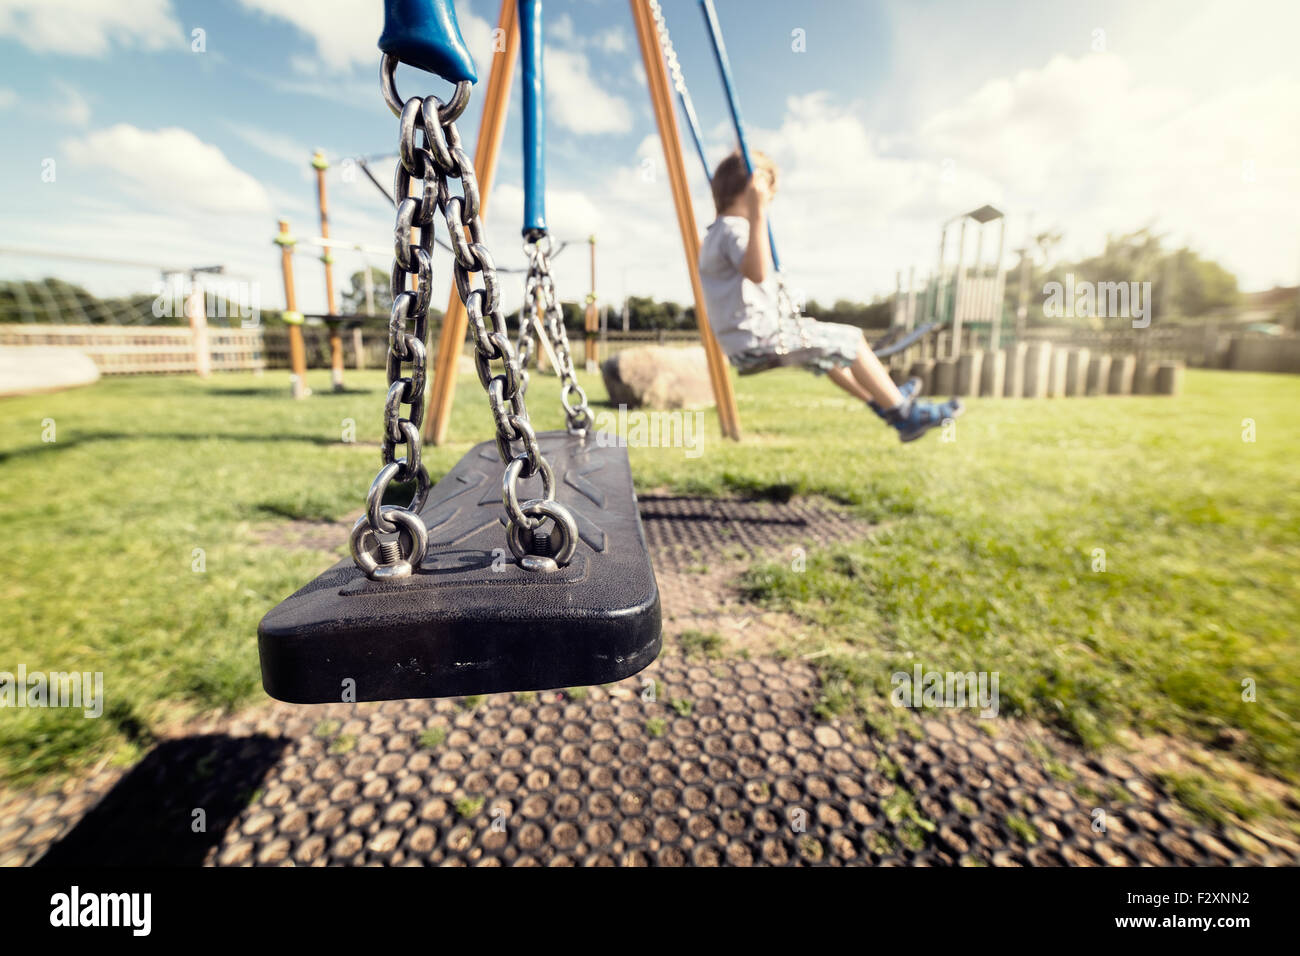 Empty playground swing with children playing in the background concept for child protection, abduction or loneliness Stock Photo